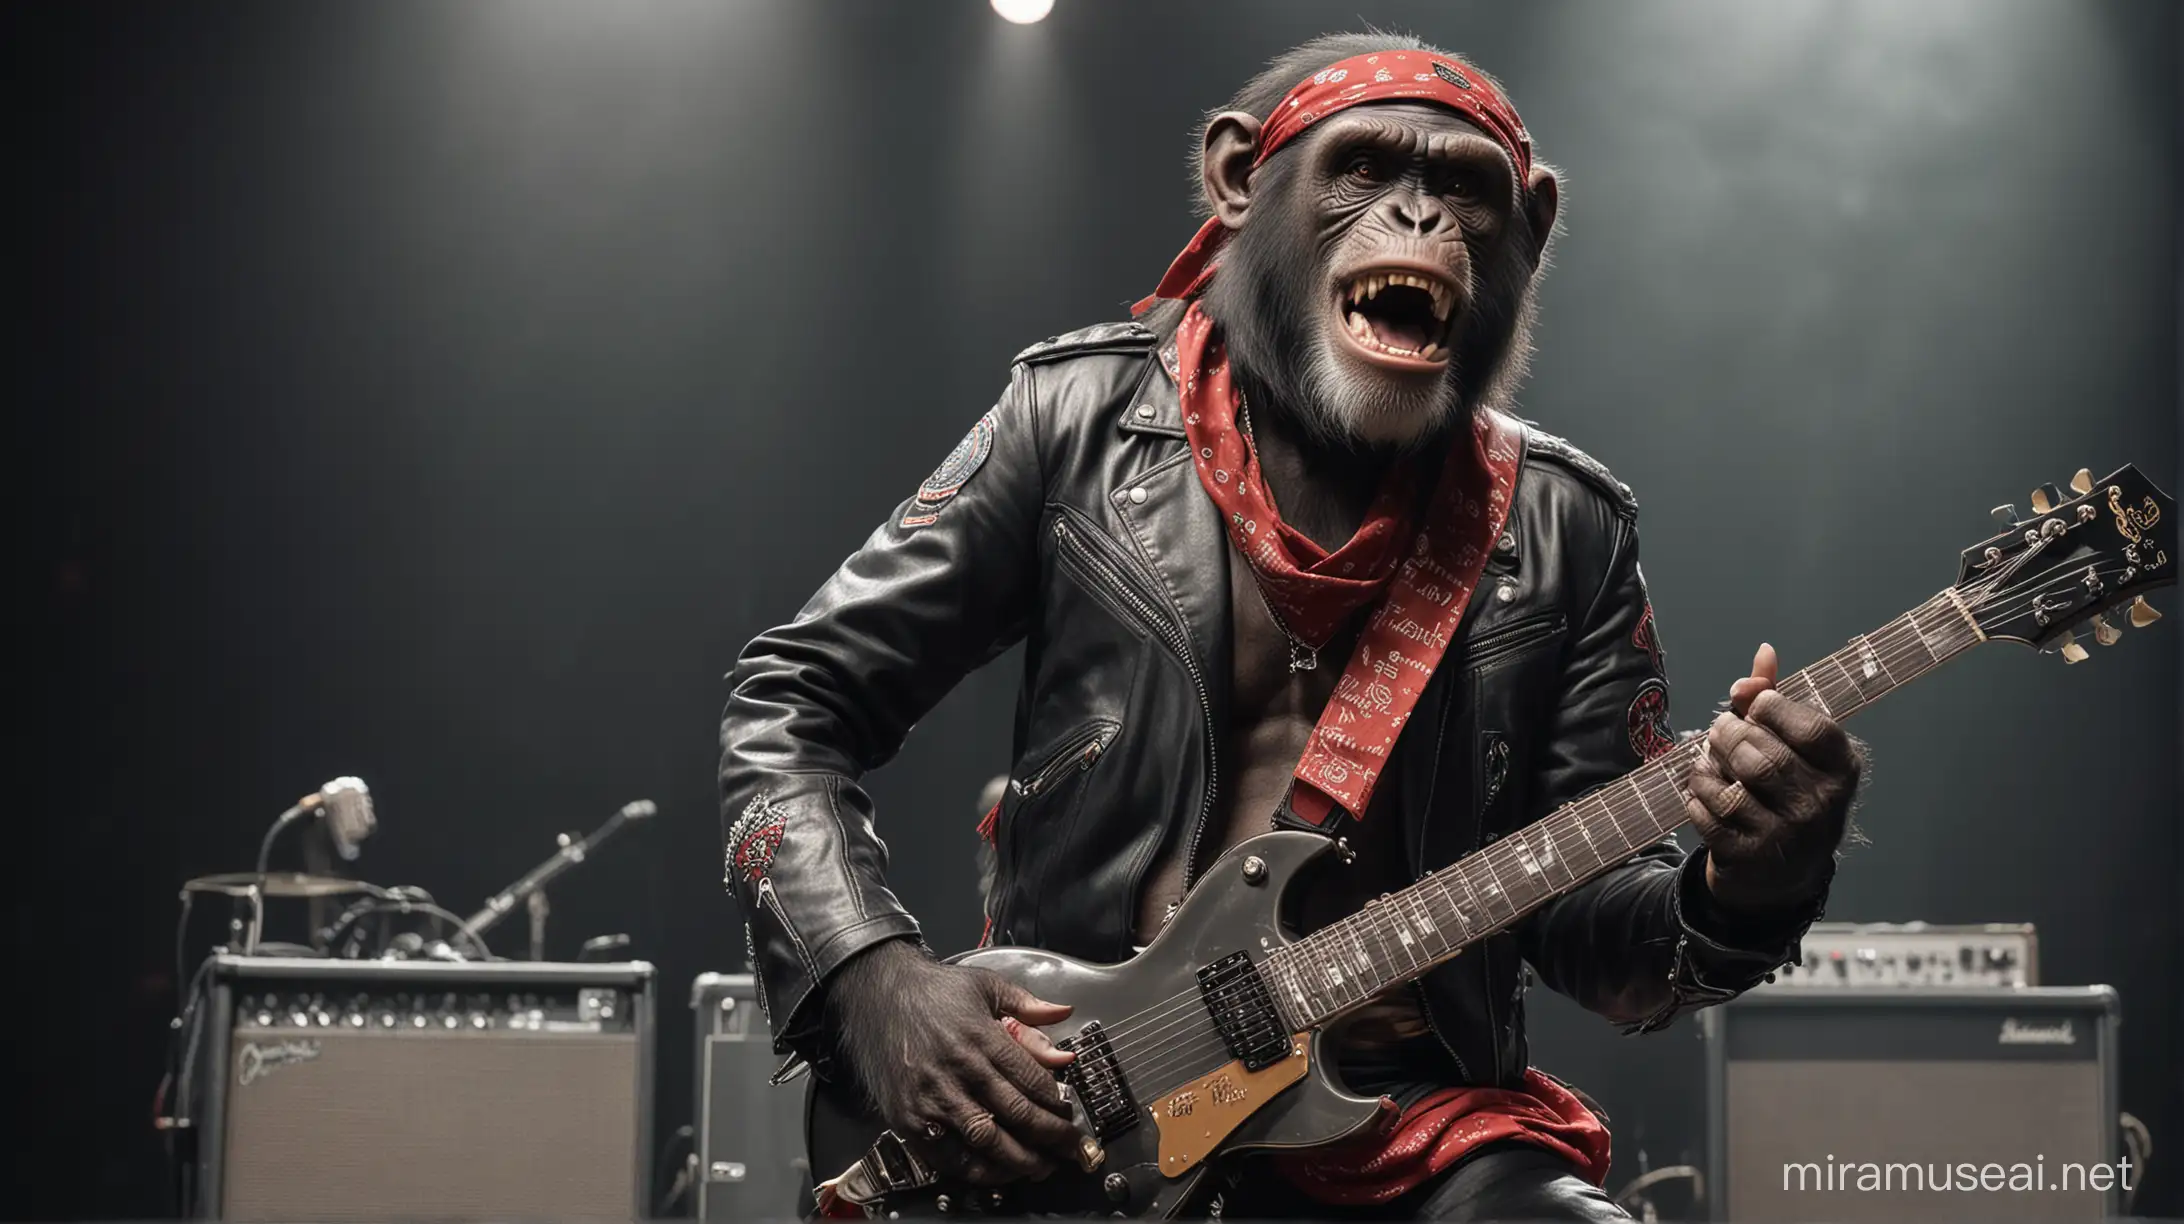 A chimpanzee, as a heavy metal rock star, playing a Gibson Les Paul, on stage, wearing a leather jacket and a red bandana and posing for the audience